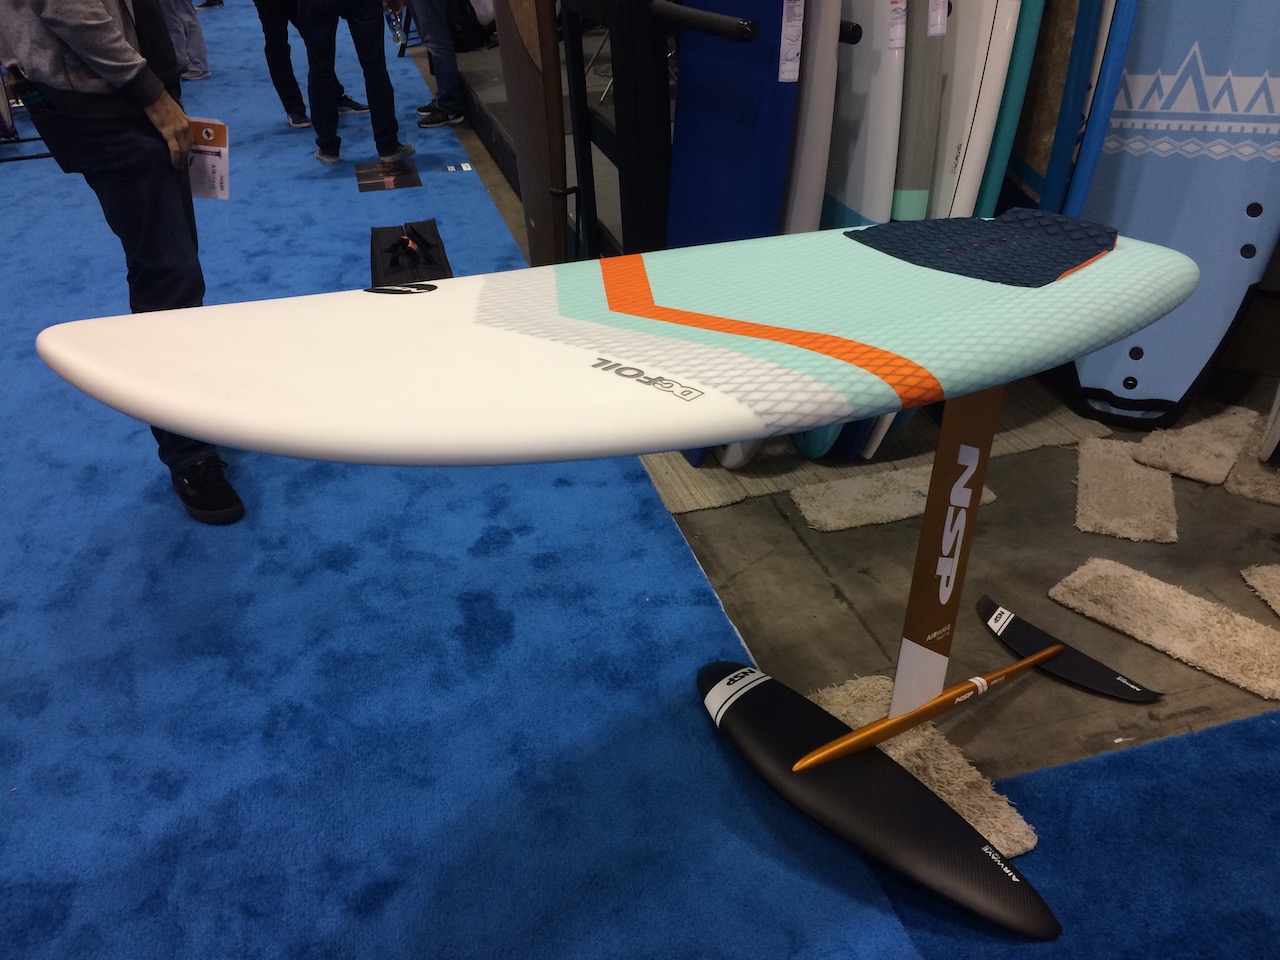 NSP's Surf Foilboard designed by Dale Chapman comes in 3 sizes